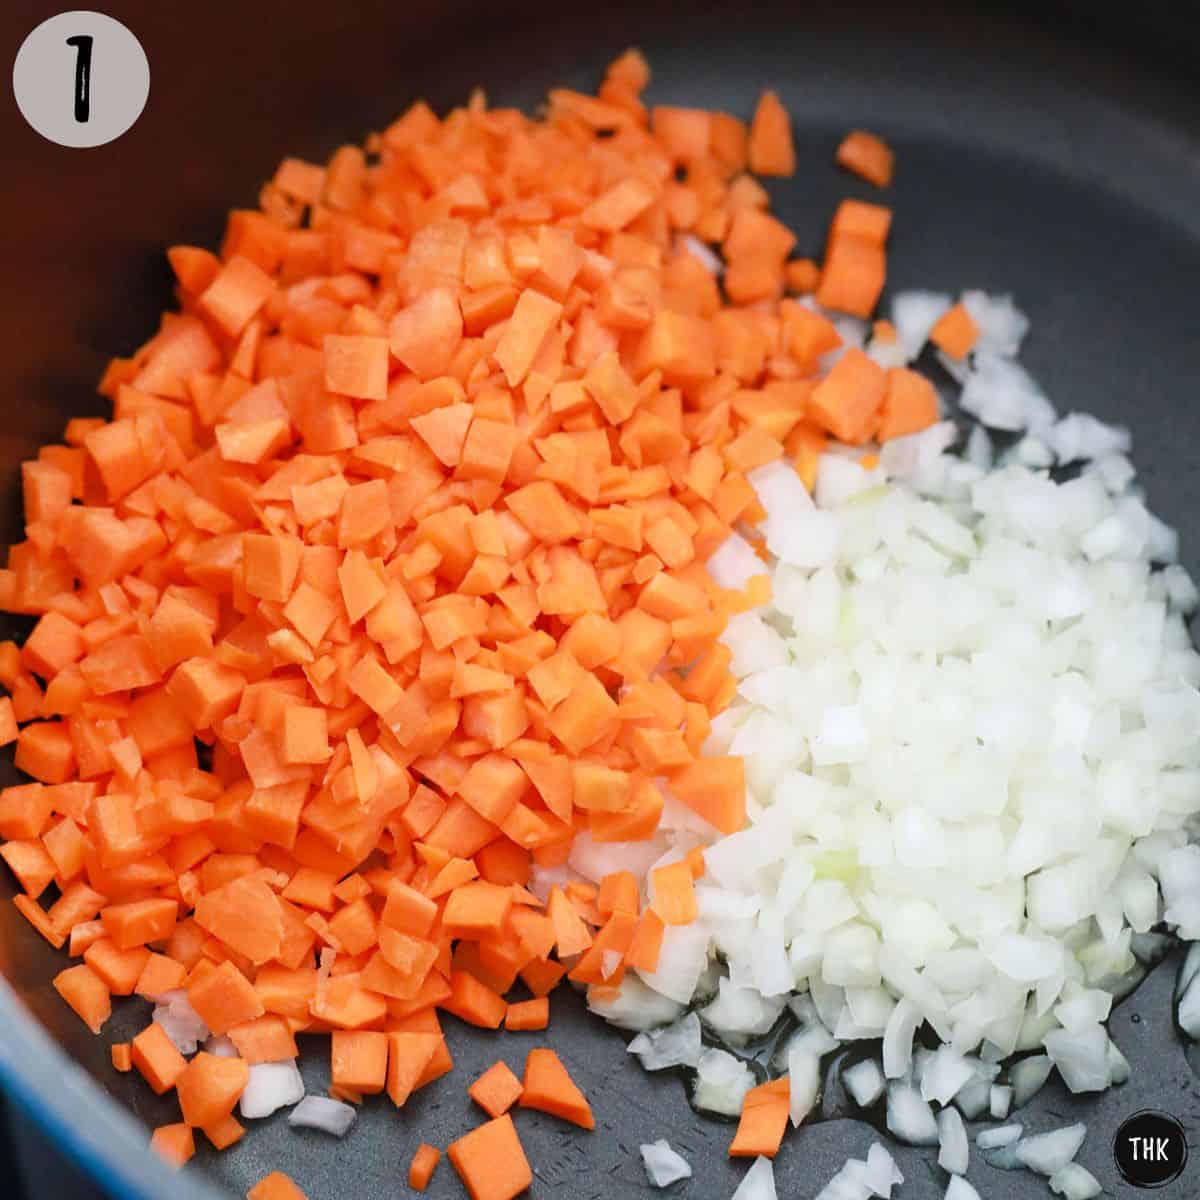 Diced carrots and onion inside large pot.